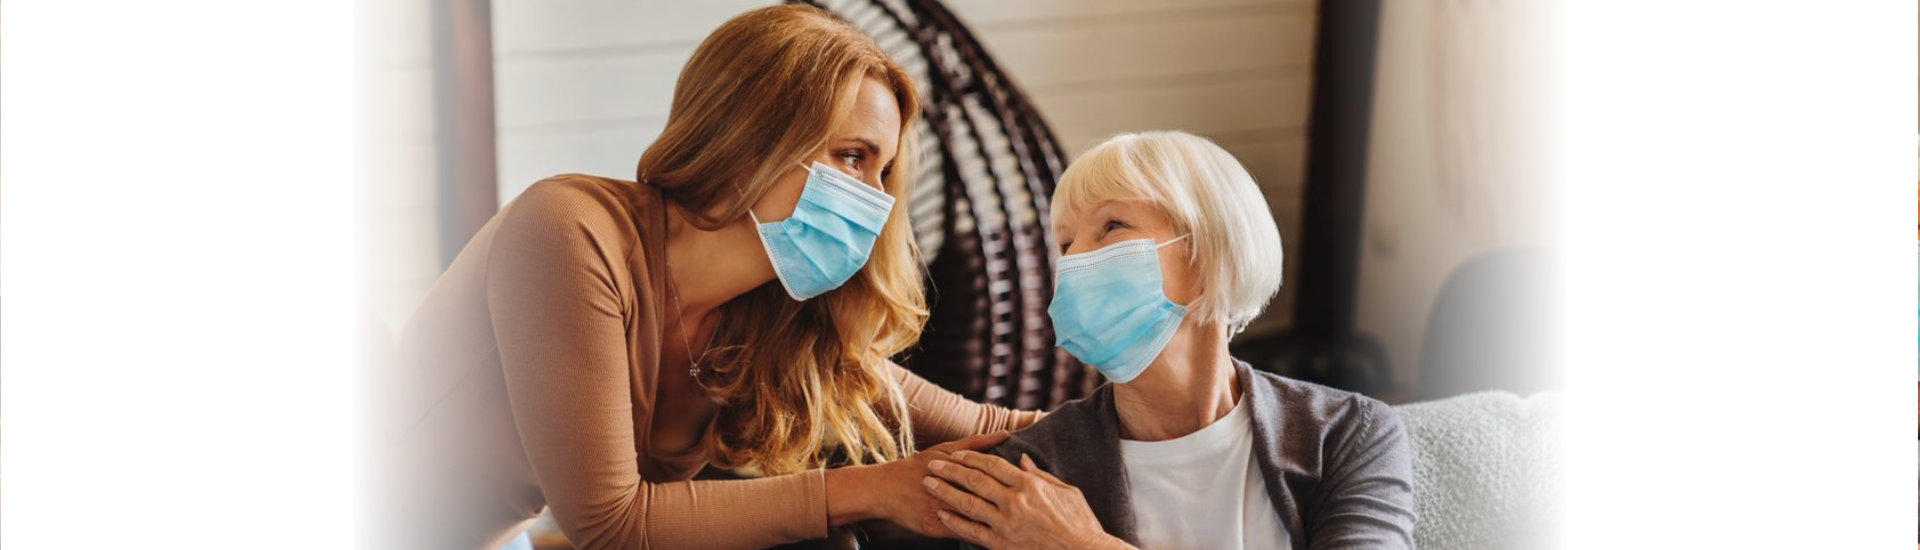 caregiver and elderly woman wearing face mask